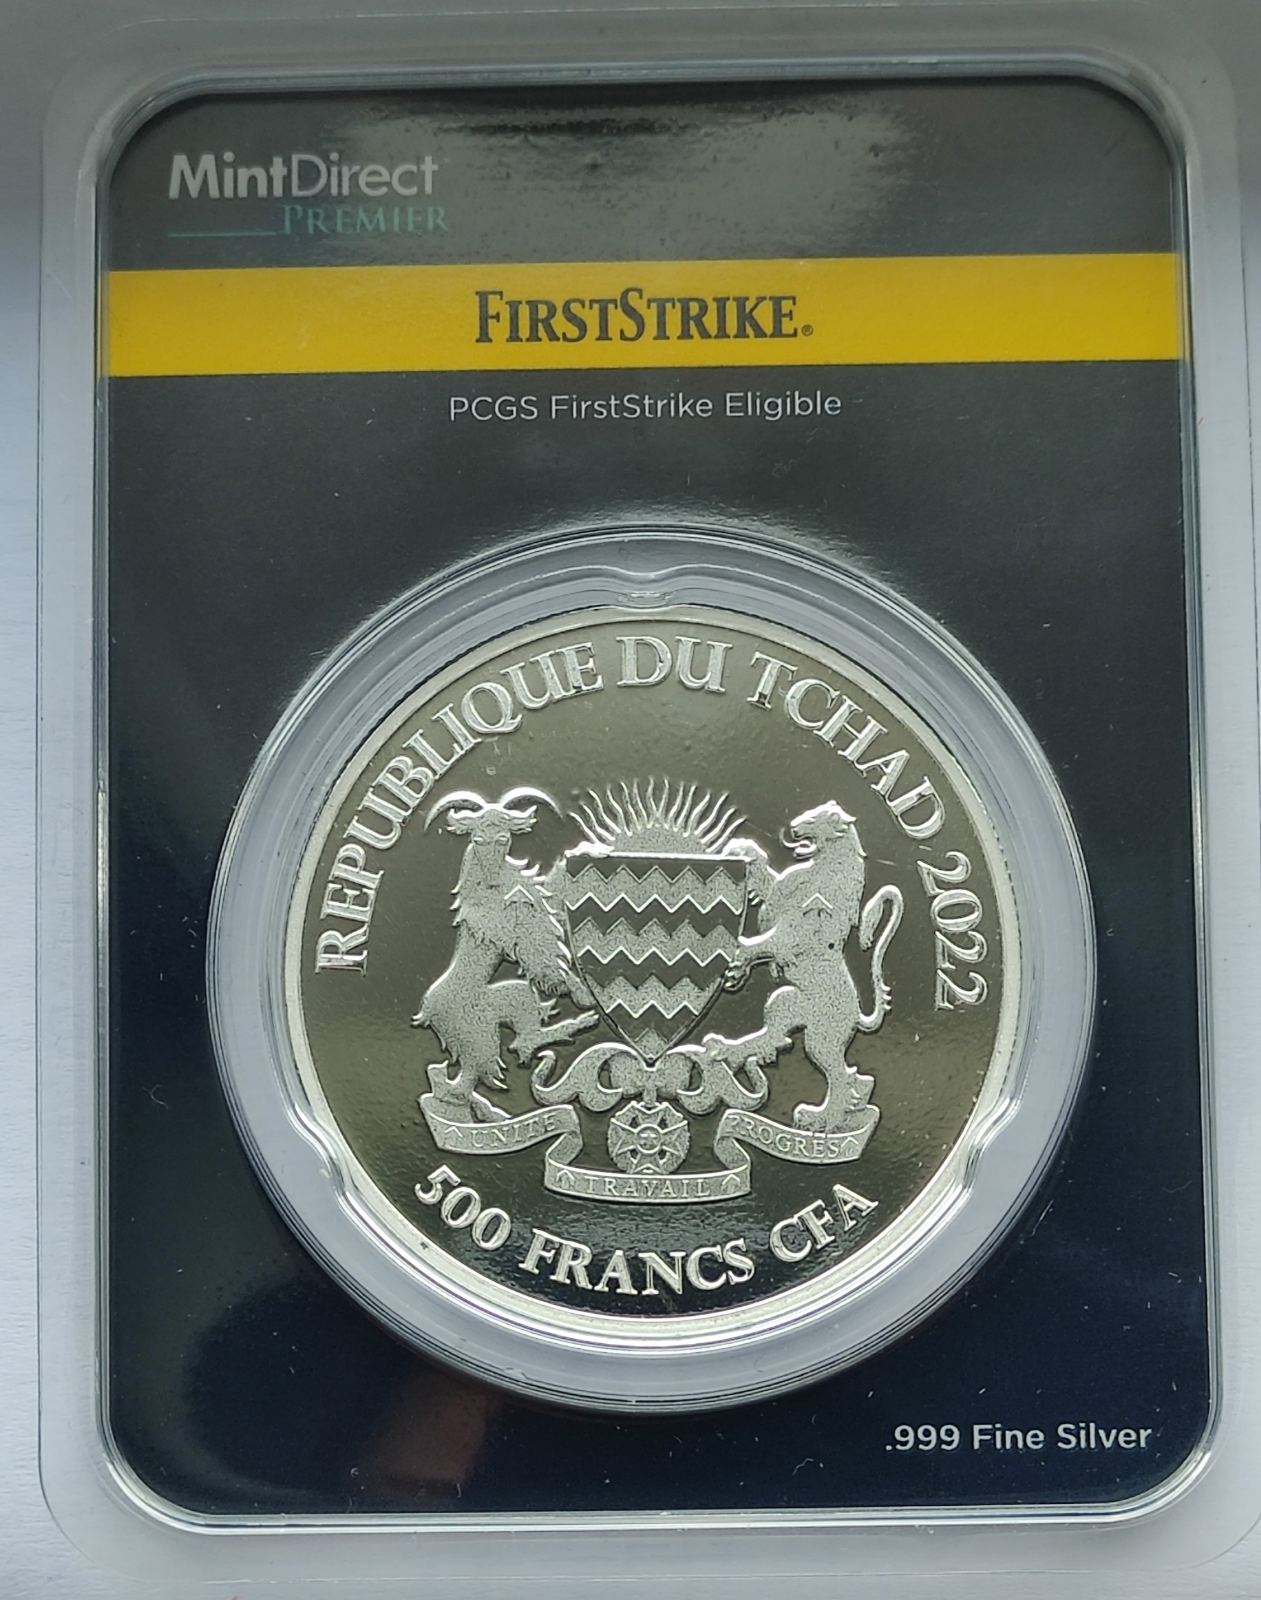 2022 Republic of Chad Celtic Animals: Wolfhound Dog 1 oz Silver Coin in MintDirect Premier Packaging + PCGS FirstStrike Eligible